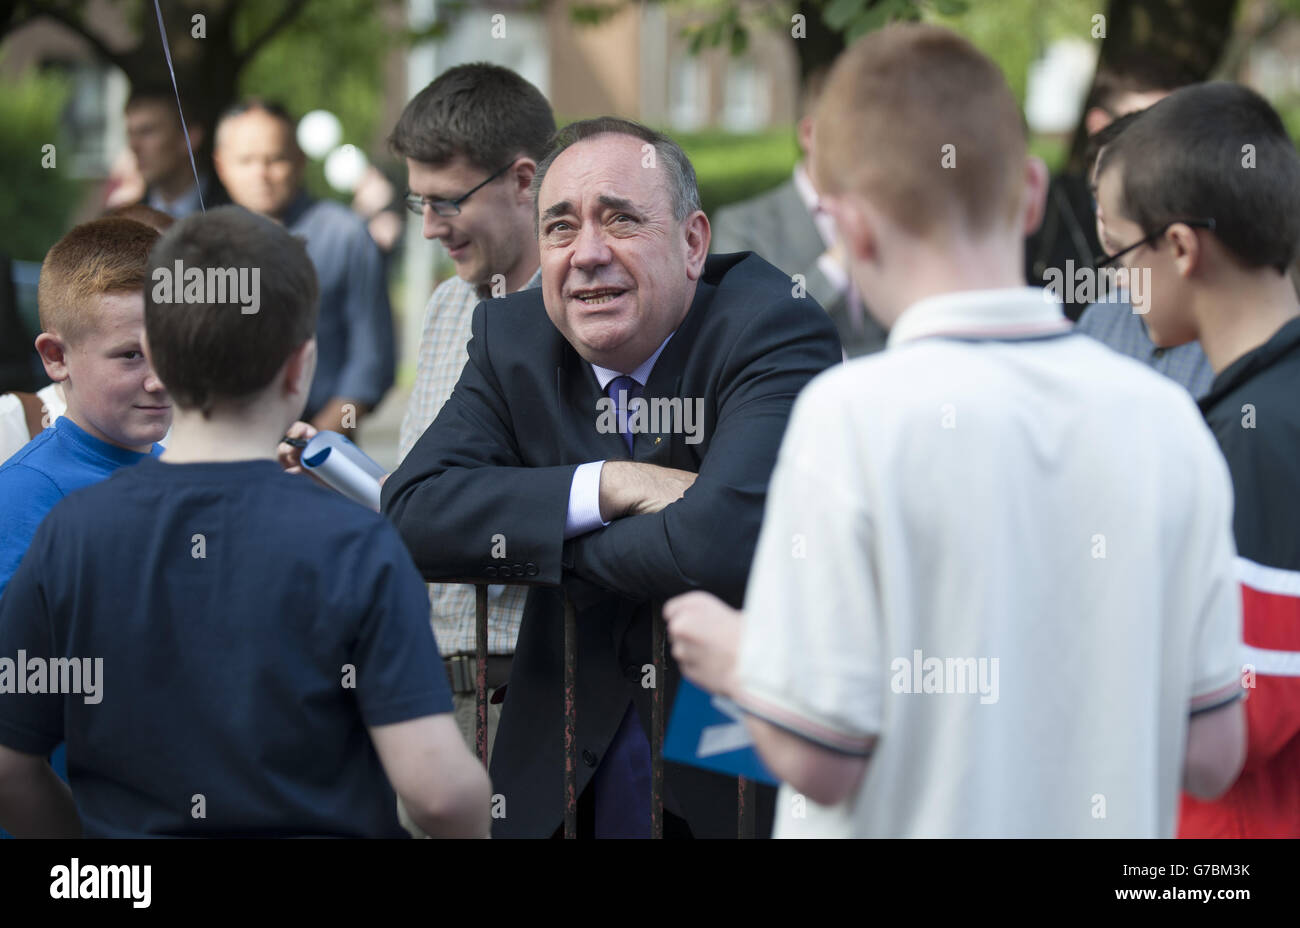 Scotland's First Minister Alex Salmond (centre) visits the Tollcross area of Glasgow to meet Yes Scotland supporters. Stock Photo